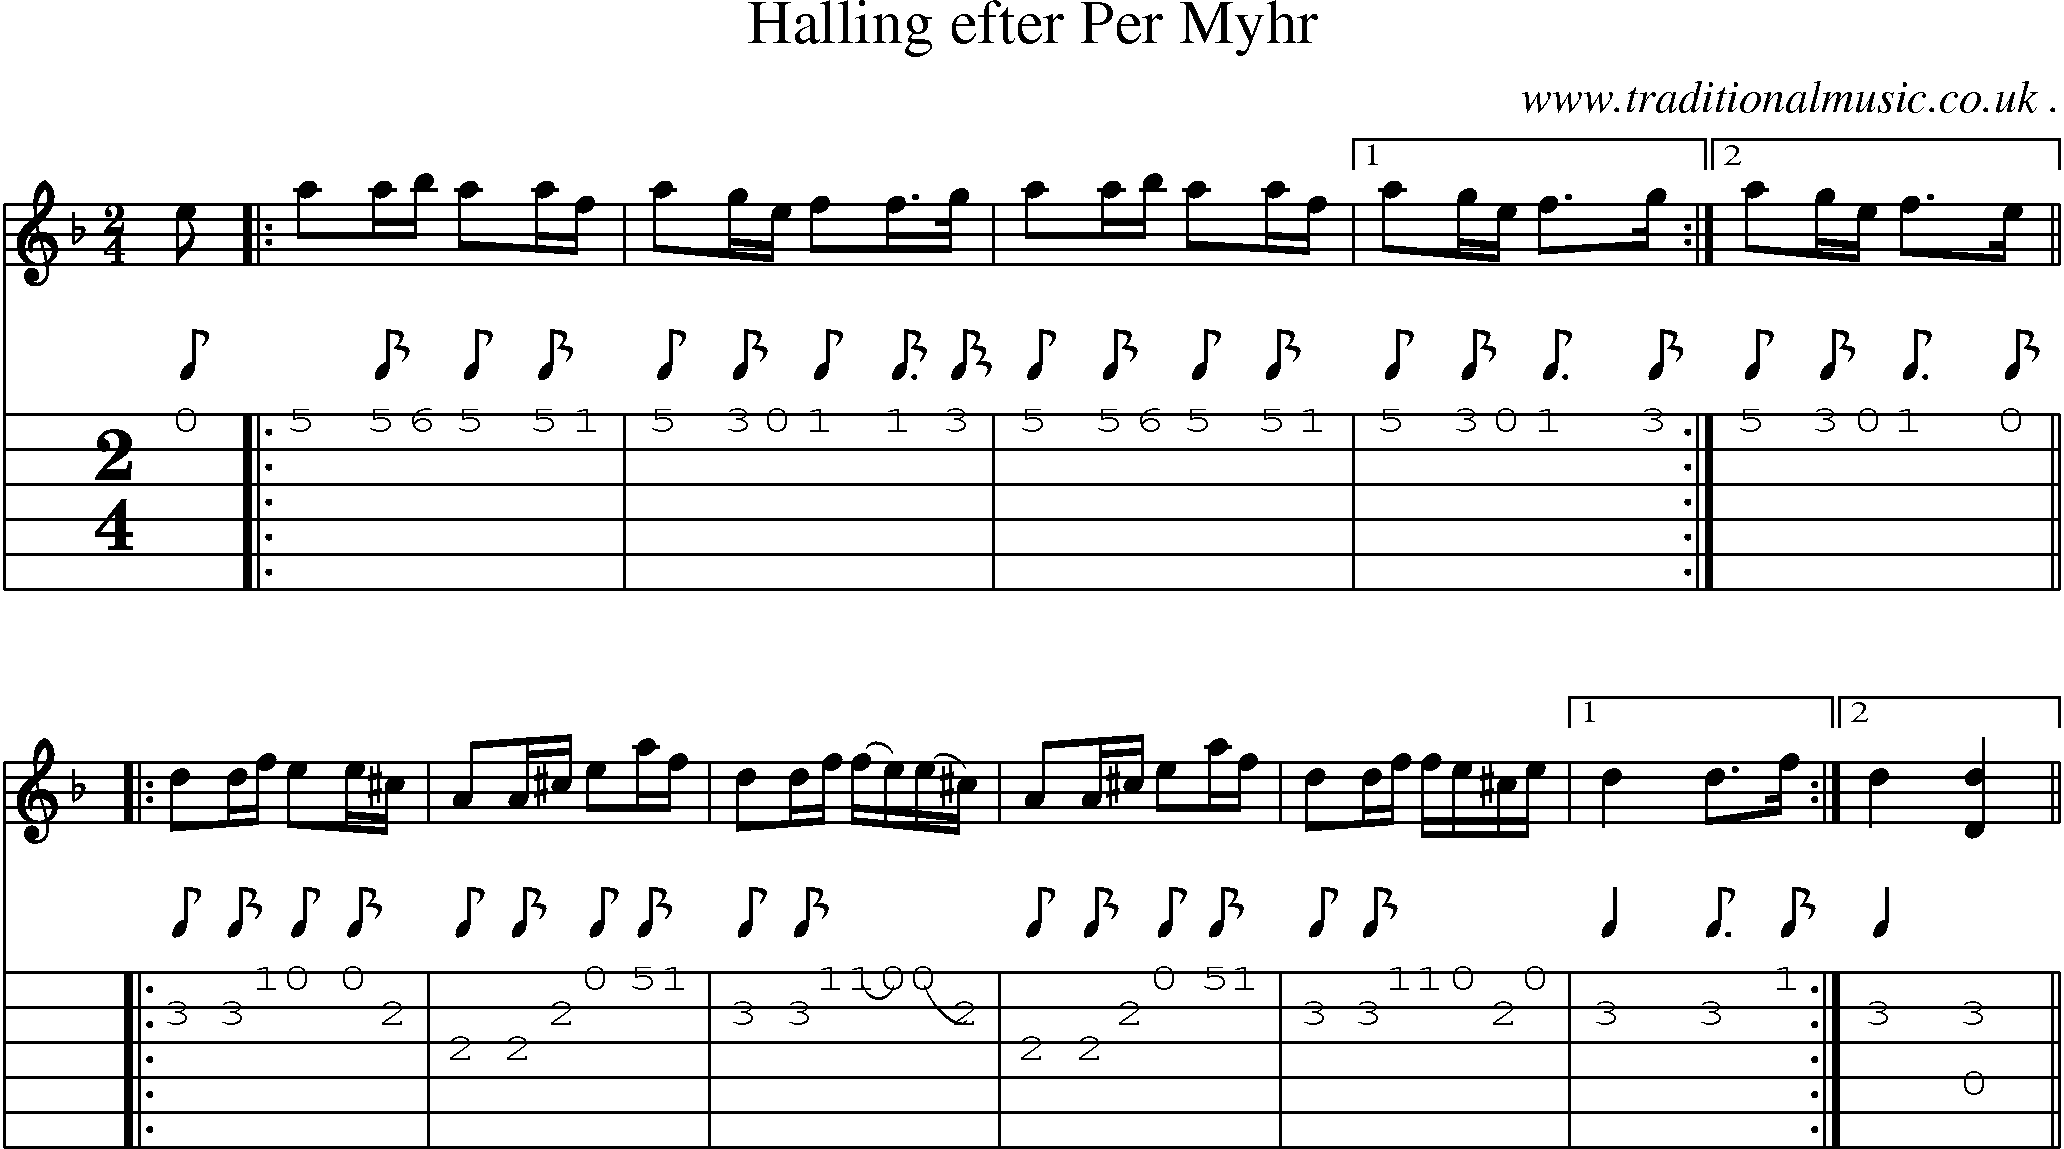 Sheet-Music and Guitar Tabs for Halling Efter Per Myhr